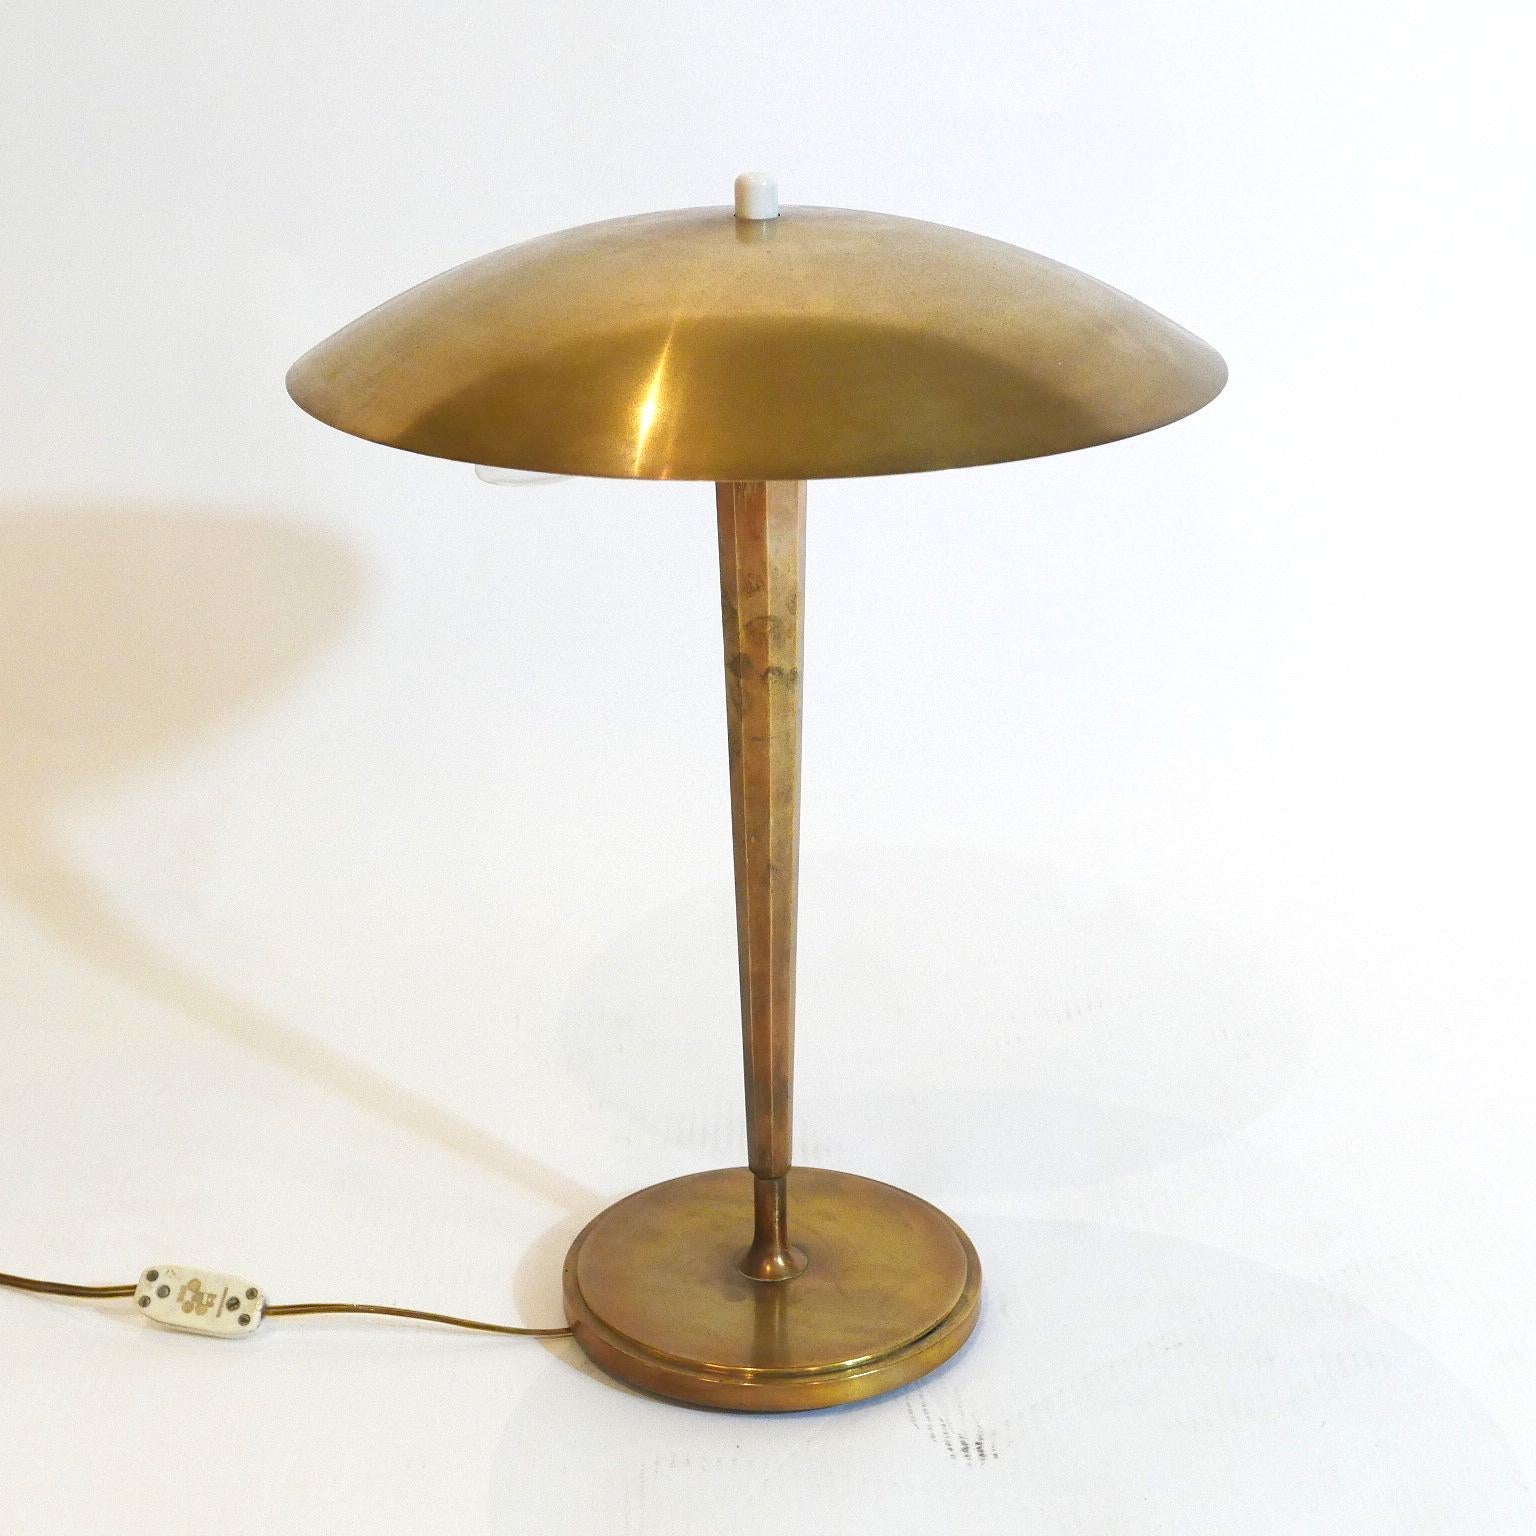 Swedish Suburb Quality Scandinavian Brass Table/Desk lamp by Bohlmark after Paavo Tynell